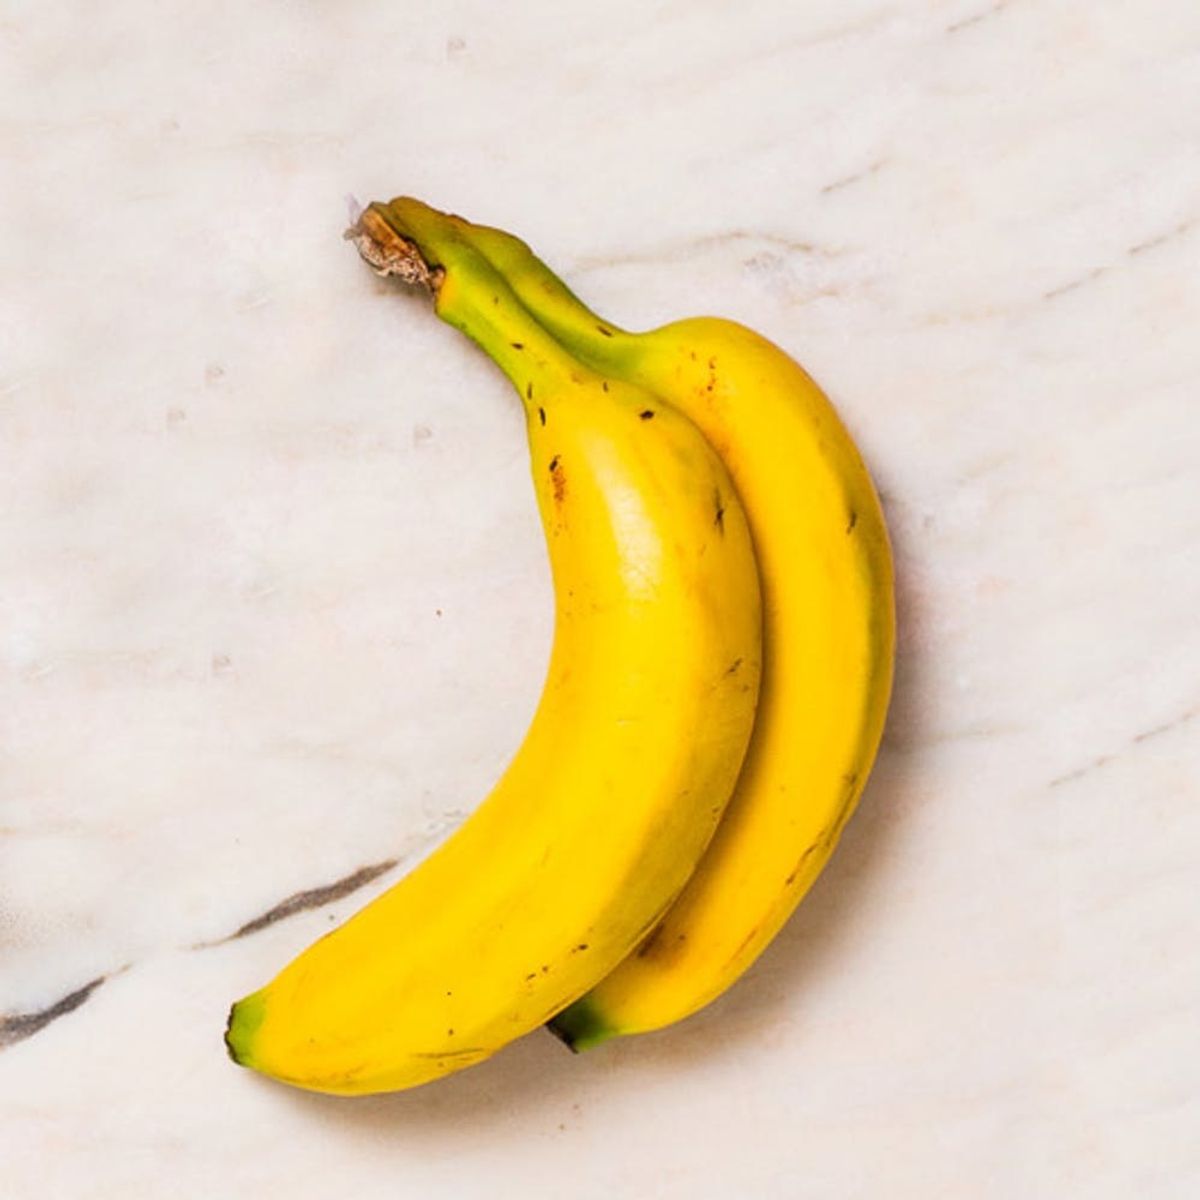 14 Unexpected Ways to Eat Bananas